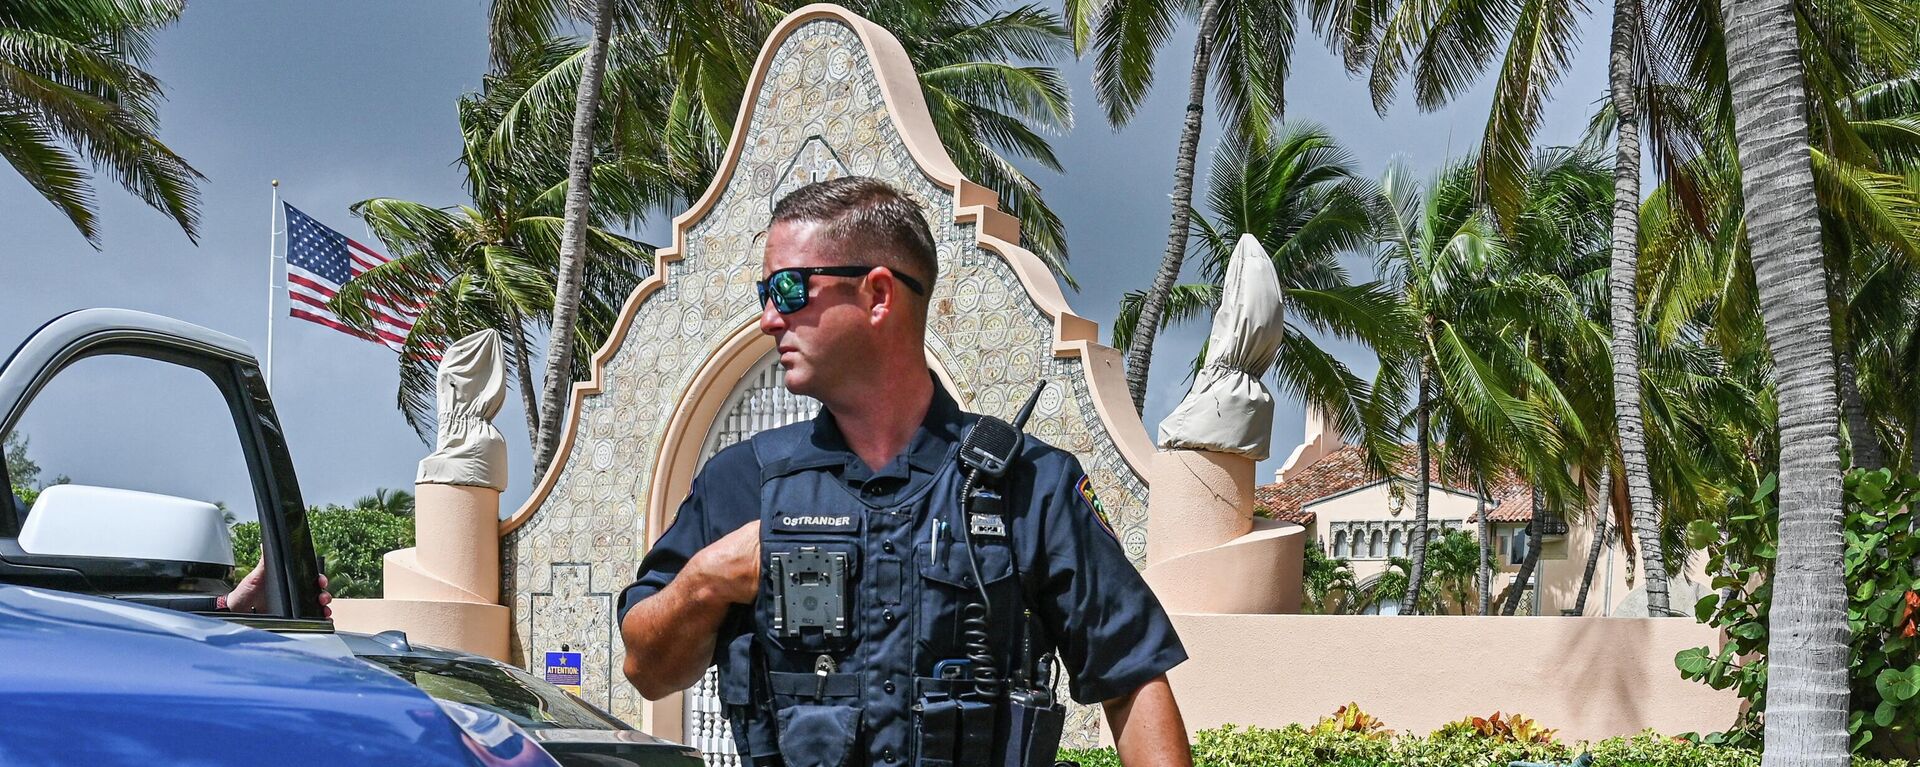 Local law enforcement officers are seen in front of the home of former President Donald Trump at Mar-A-Lago in Palm Beach, Florida on August 9, 2022. - Sputnik International, 1920, 12.08.2022